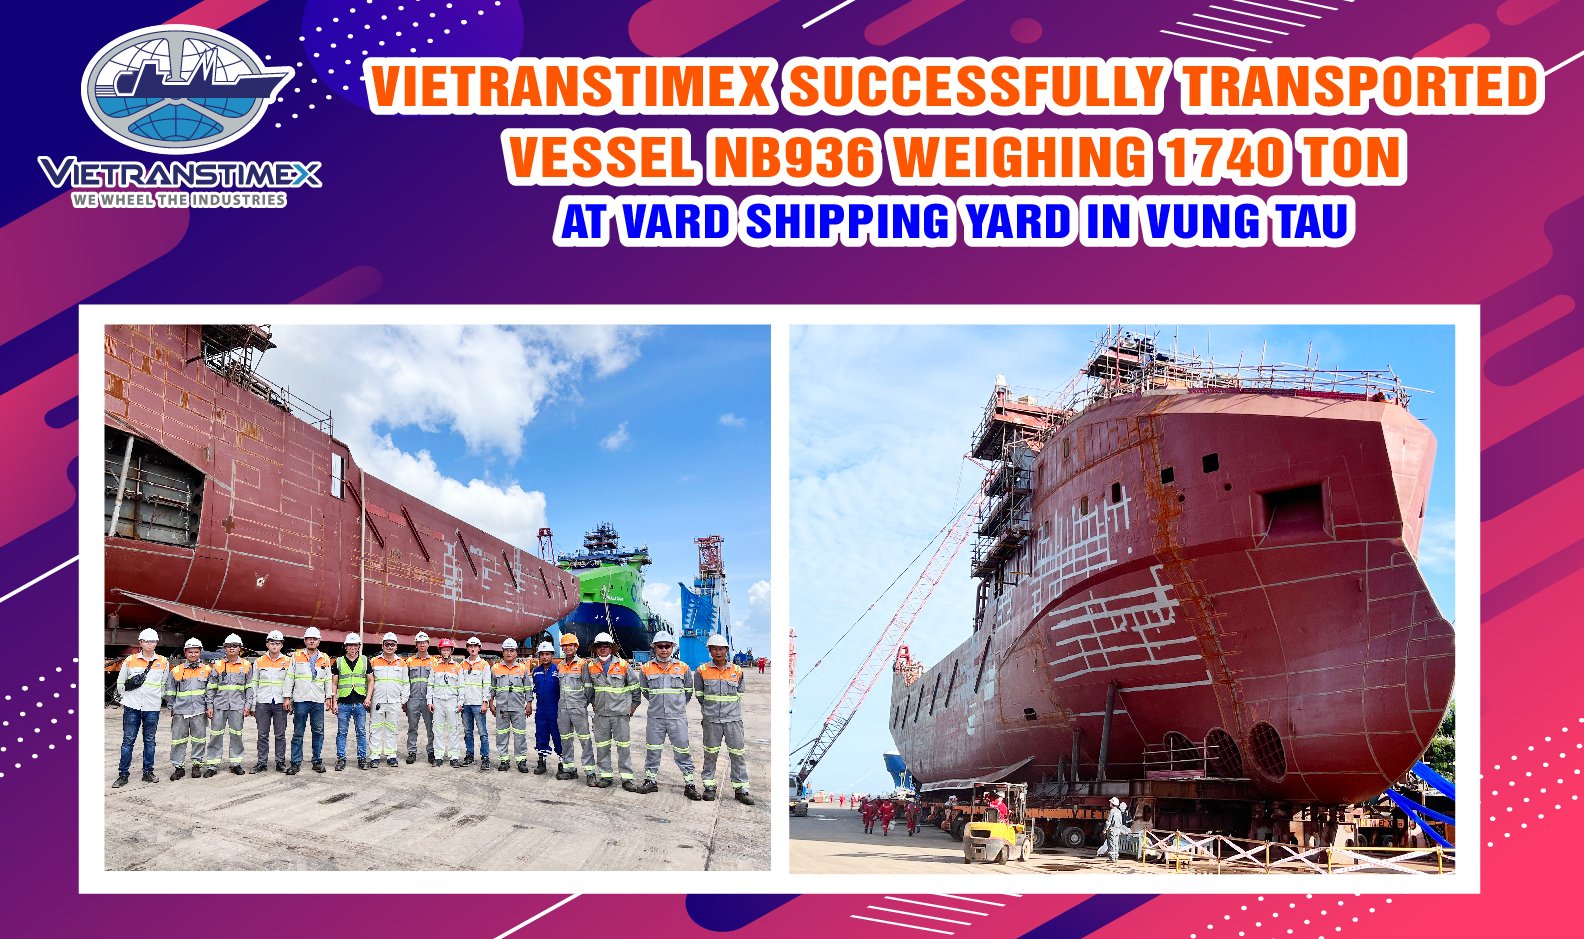 Vietranstimex Successfully Transported Vessel NB936 weighing 1740 ton at VARD Shipping yard in Vung Tau